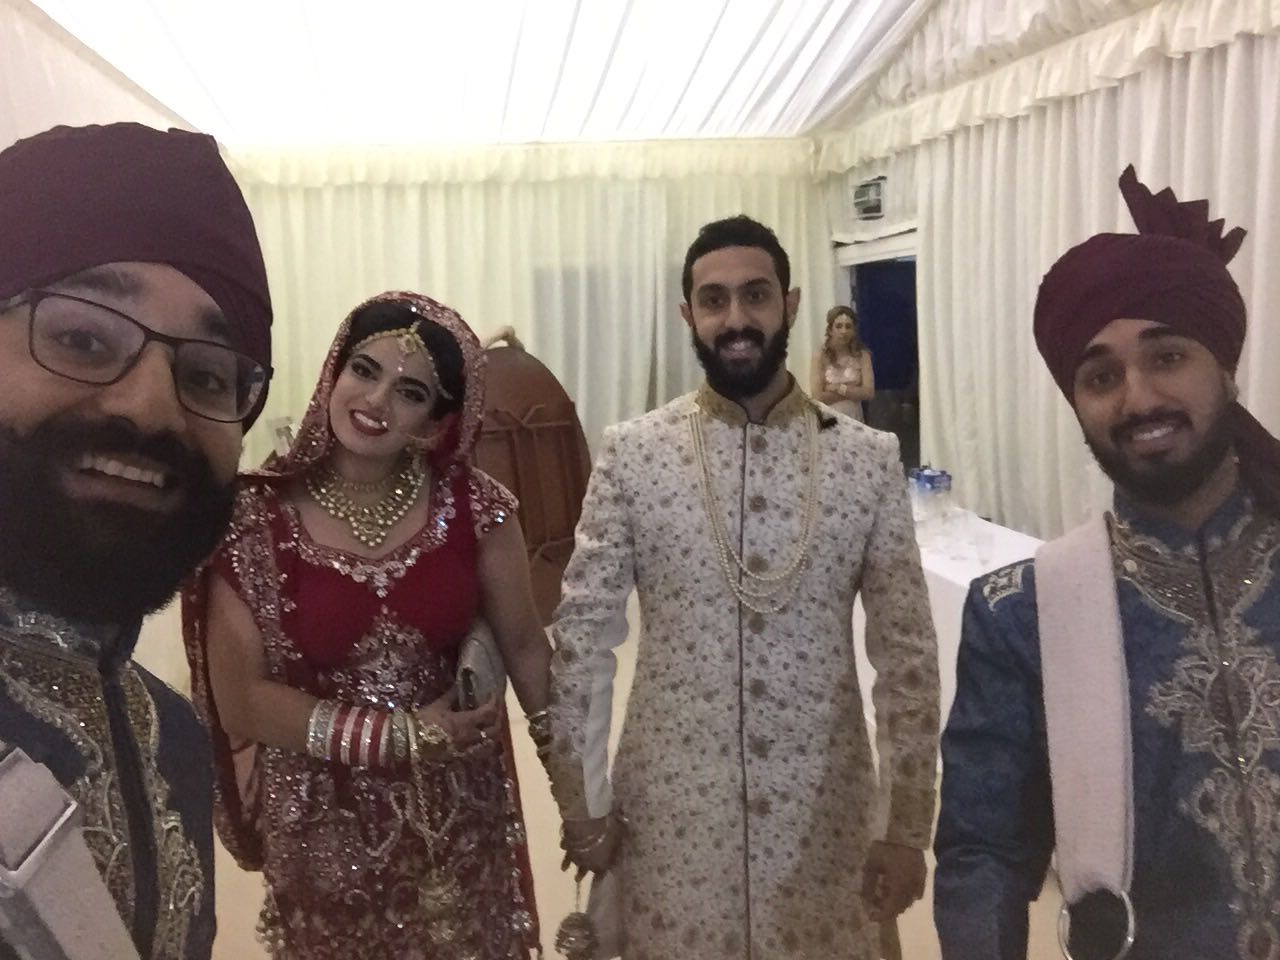 Picture of Dhol Players London Pre-'Grand Entrance' Selfie with the Bride and Groom